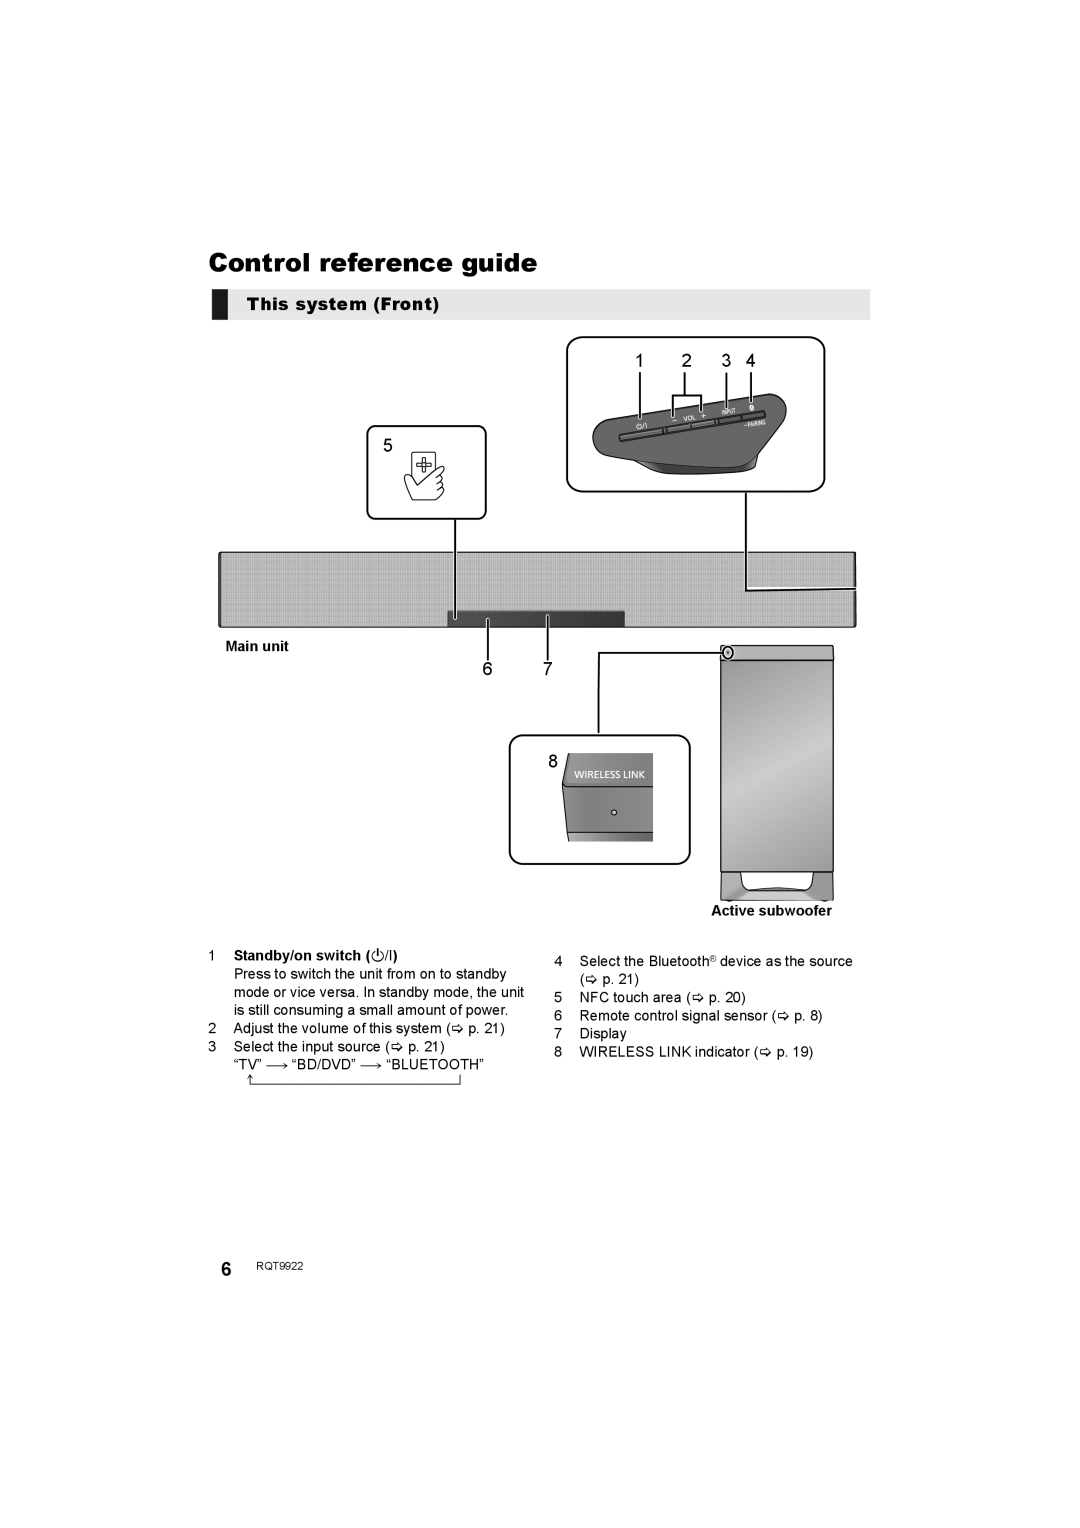 Panasonic SC-HTB580 owner manual Control reference guide, This system Front 